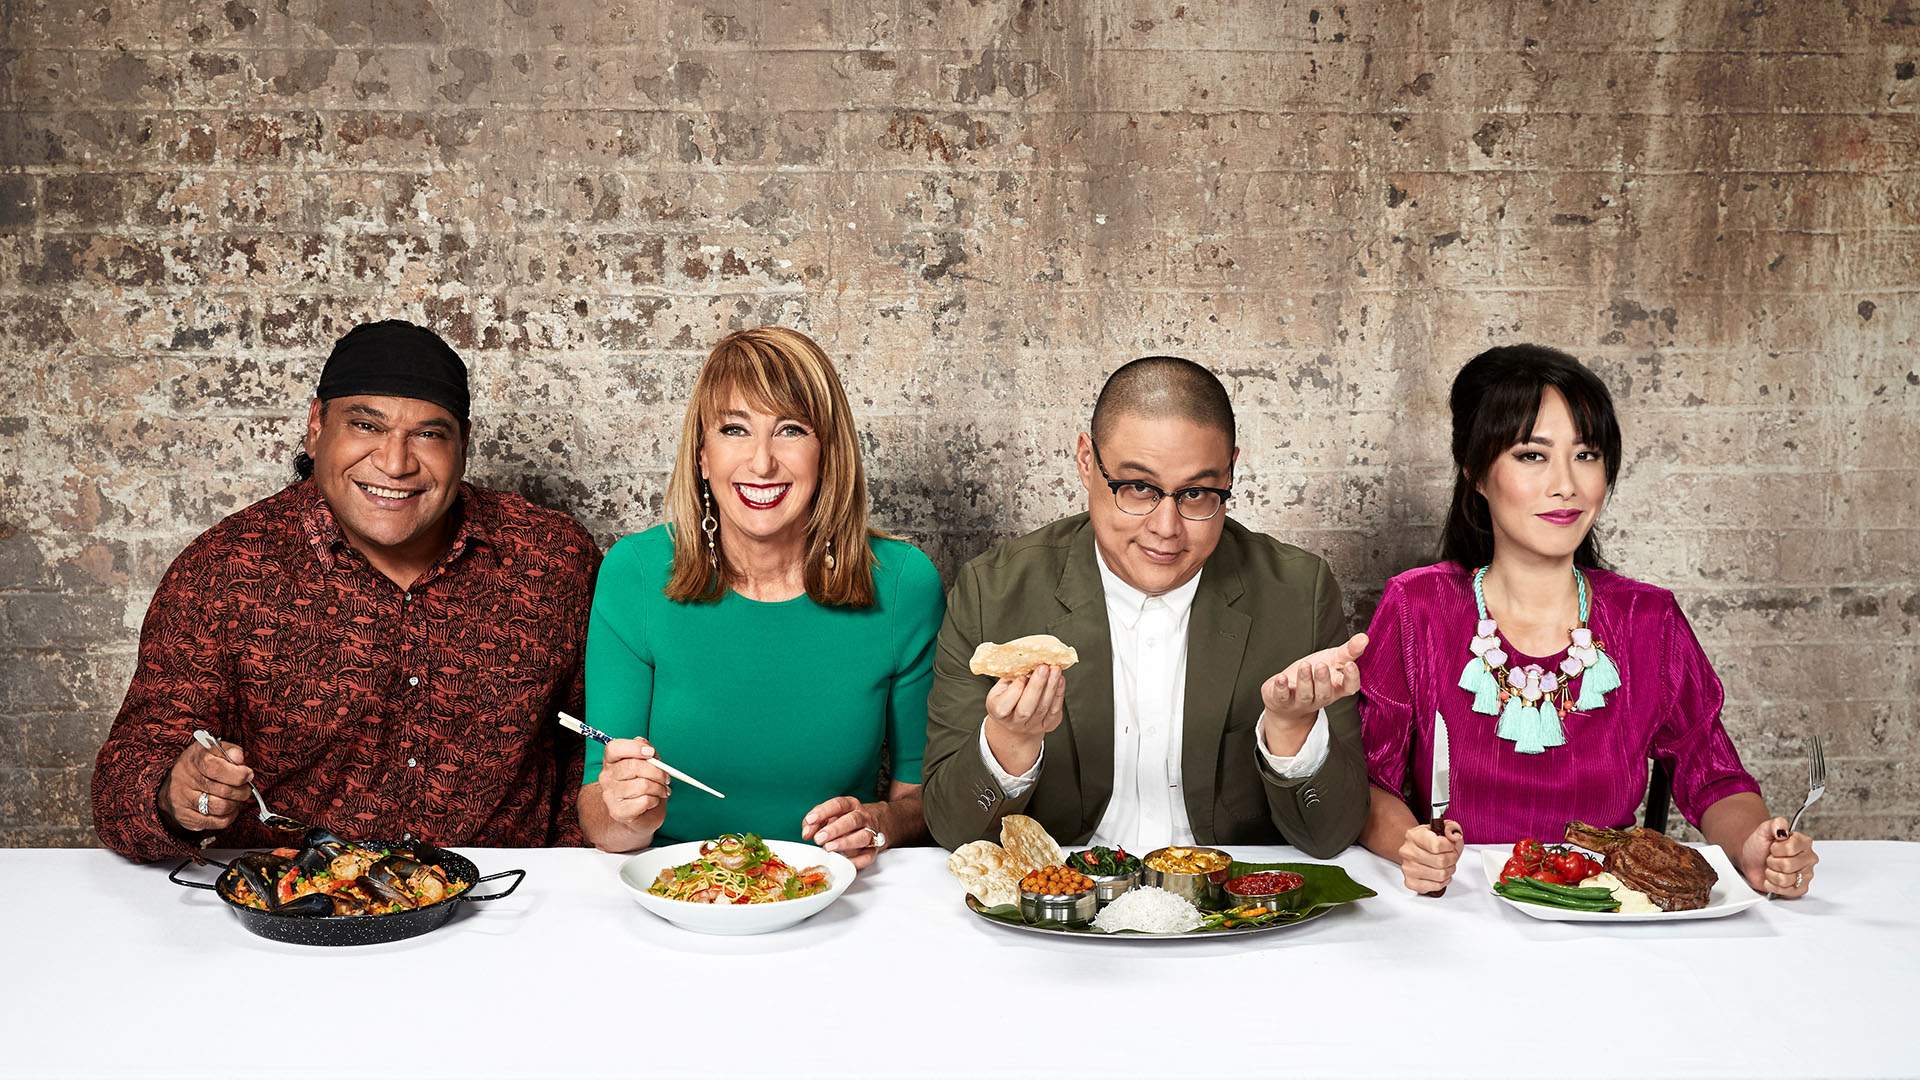 A Look at SBS' New Competitive Cooking Series, The Chef's Line